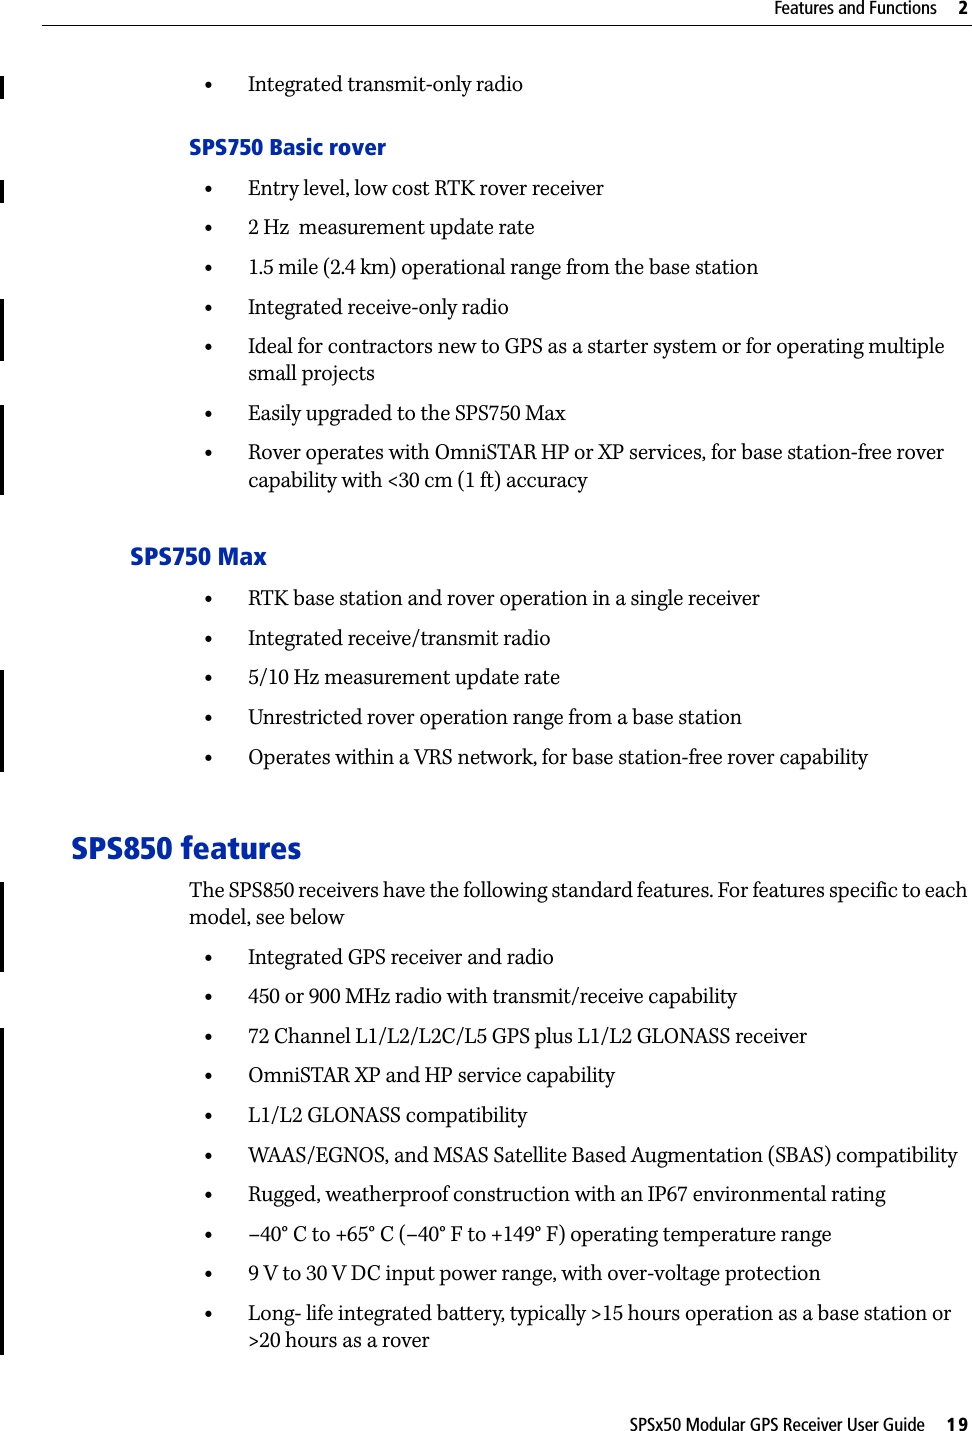 SPSx50 Modular GPS Receiver User Guide     19Features and Functions     2•Integrated transmit-only radioSPS750 Basic rover•Entry level, low cost RTK rover receiver•2 Hz  measurement update rate•1.5 mile (2.4 km) operational range from the base station•Integrated receive-only radio•Ideal for contractors new to GPS as a starter system or for operating multiple small projects •Easily upgraded to the SPS750 Max•Rover operates with OmniSTAR HP or XP services, for base station-free rover capability with &lt;30 cm (1 ft) accuracySPS750 Max•RTK base station and rover operation in a single receiver•Integrated receive/transmit radio•5/10 Hz measurement update rate•Unrestricted rover operation range from a base station•Operates within a VRS network, for base station-free rover capabilitySPS850 featuresThe SPS850 receivers have the following standard features. For features specific to each model, see below•Integrated GPS receiver and radio•450 or 900 MHz radio with transmit/receive capability•72 Channel L1/L2/L2C/L5 GPS plus L1/L2 GLONASS receiver•OmniSTAR XP and HP service capability•L1/L2 GLONASS compatibility•WAAS/EGNOS, and MSAS Satellite Based Augmentation (SBAS) compatibility•Rugged, weatherproof construction with an IP67 environmental rating•–40° C to +65° C (–40° F to +149° F) operating temperature range•9 V to 30 V DC input power range, with over-voltage protection•Long- life integrated battery, typically &gt;15 hours operation as a base station or &gt;20 hours as a rover